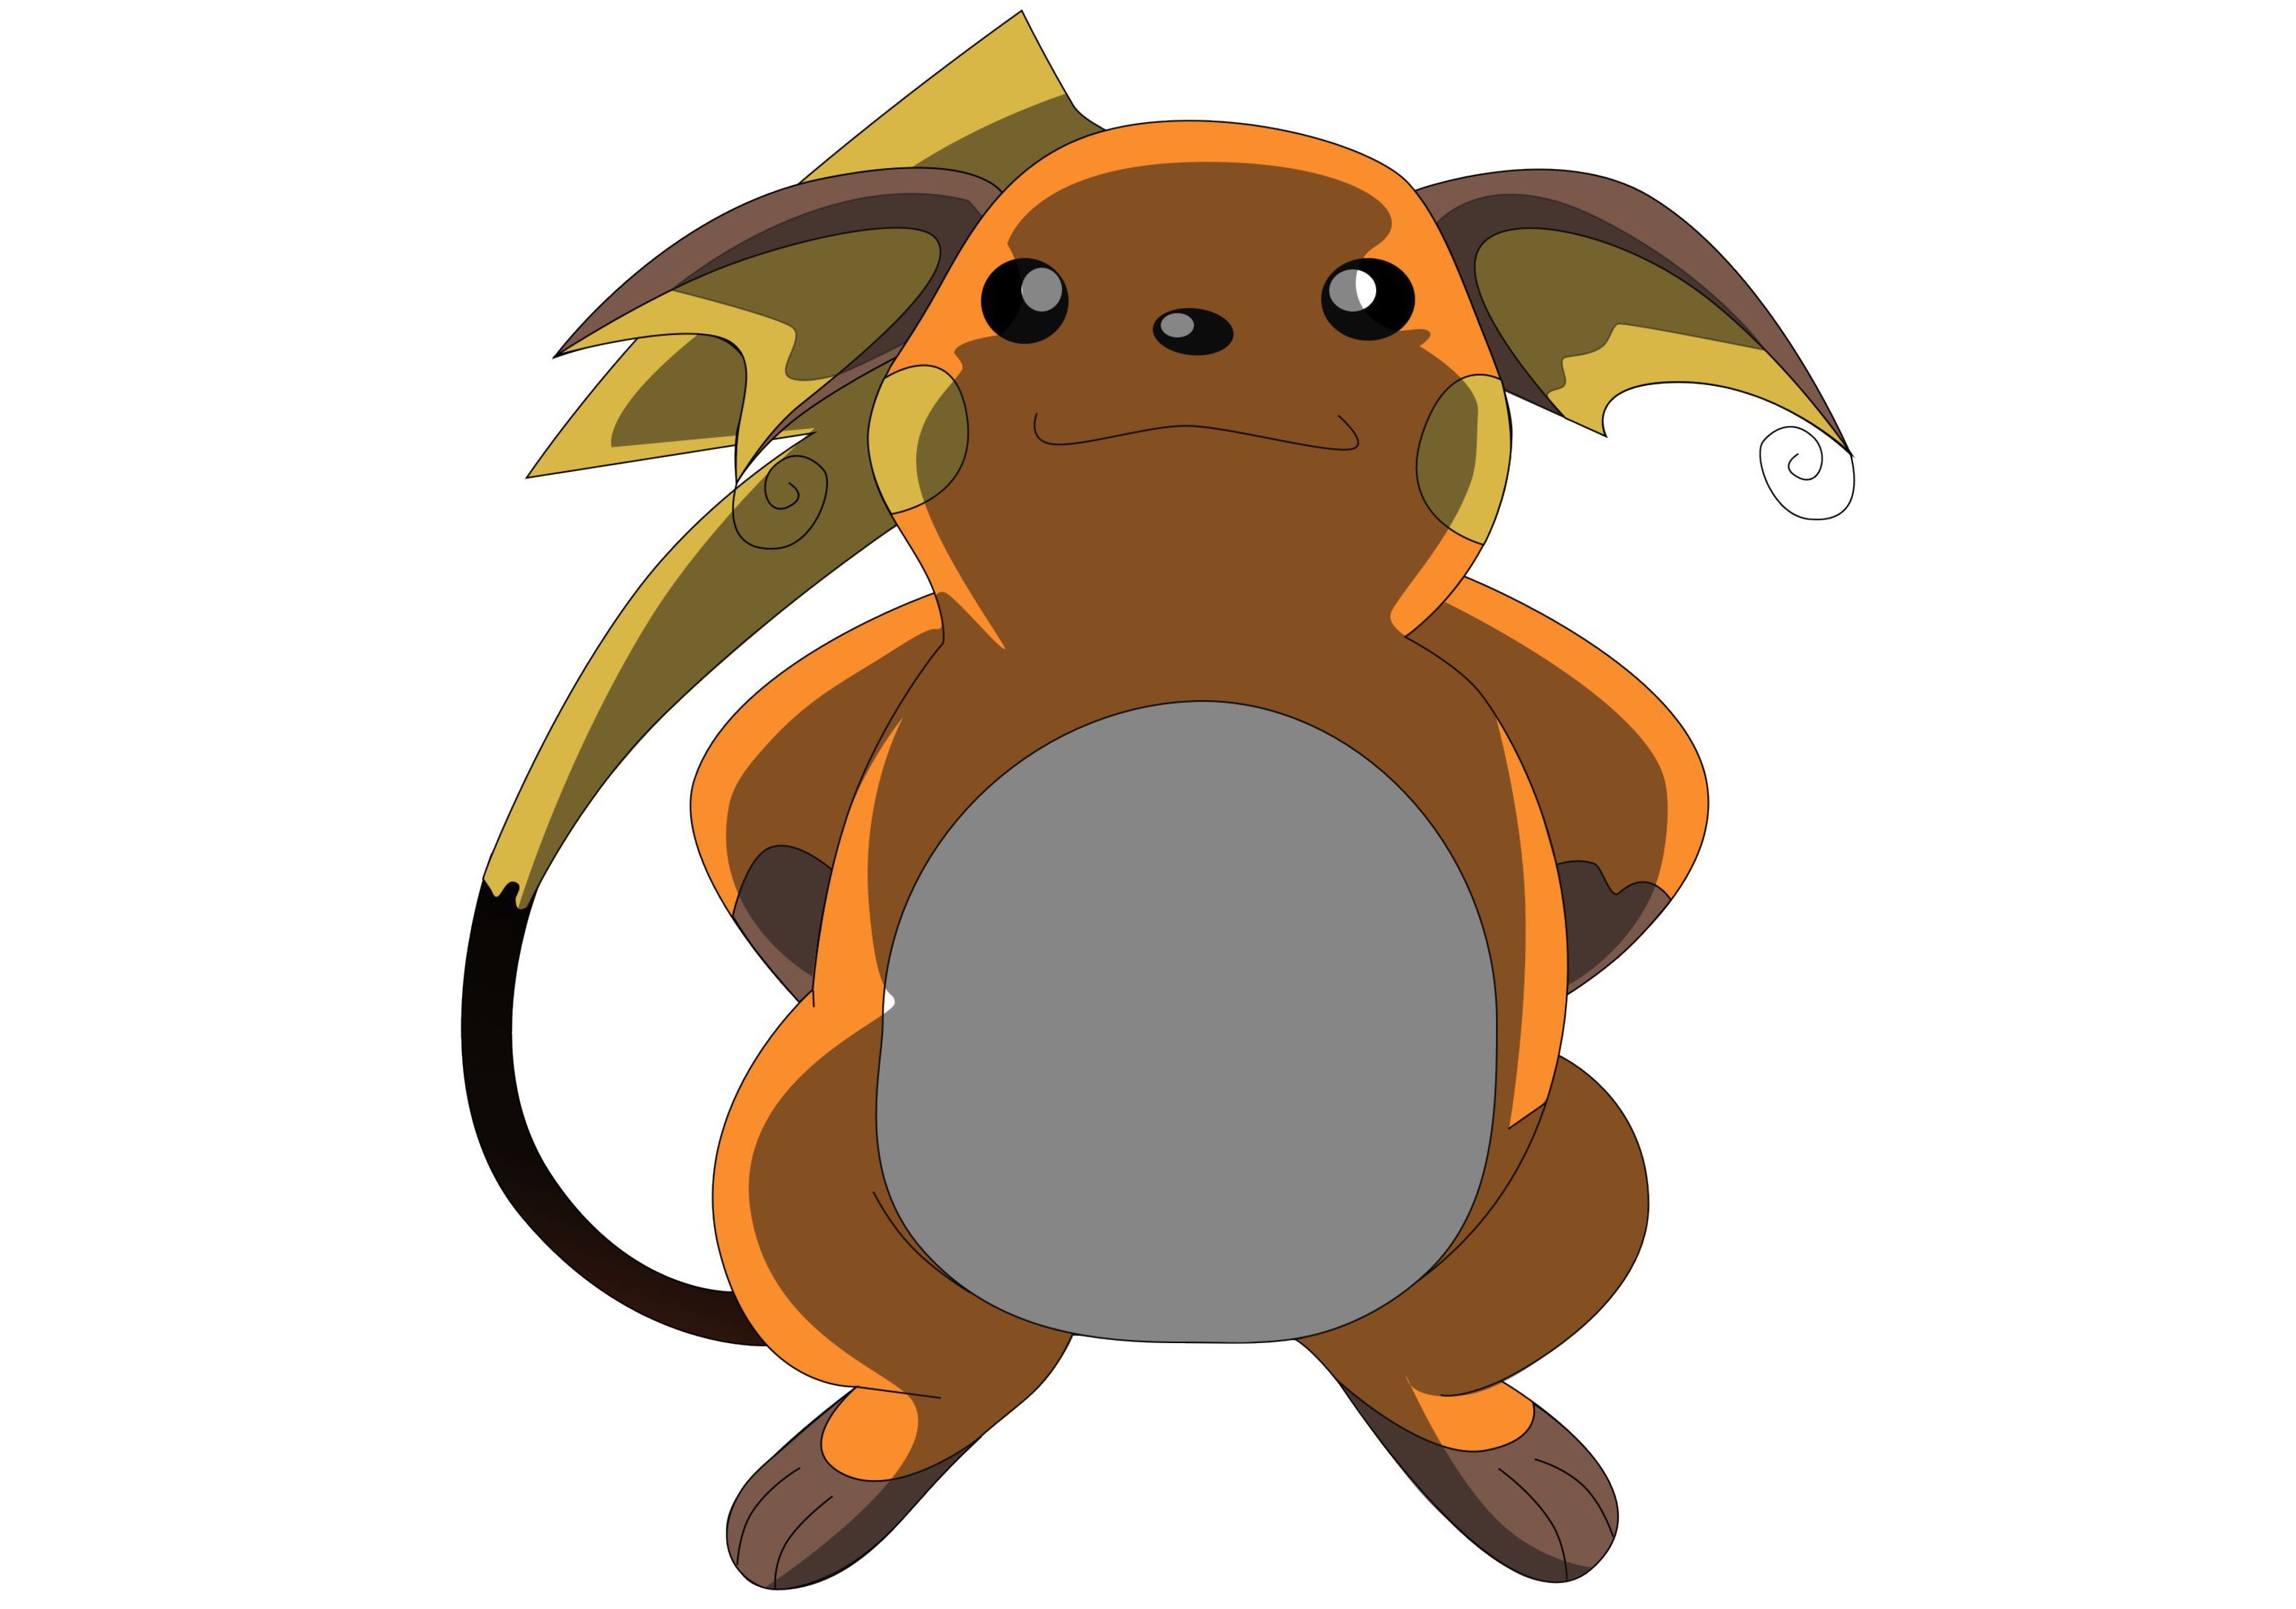 Download free Wallpapers of Raichu in high resolution and high quality. 